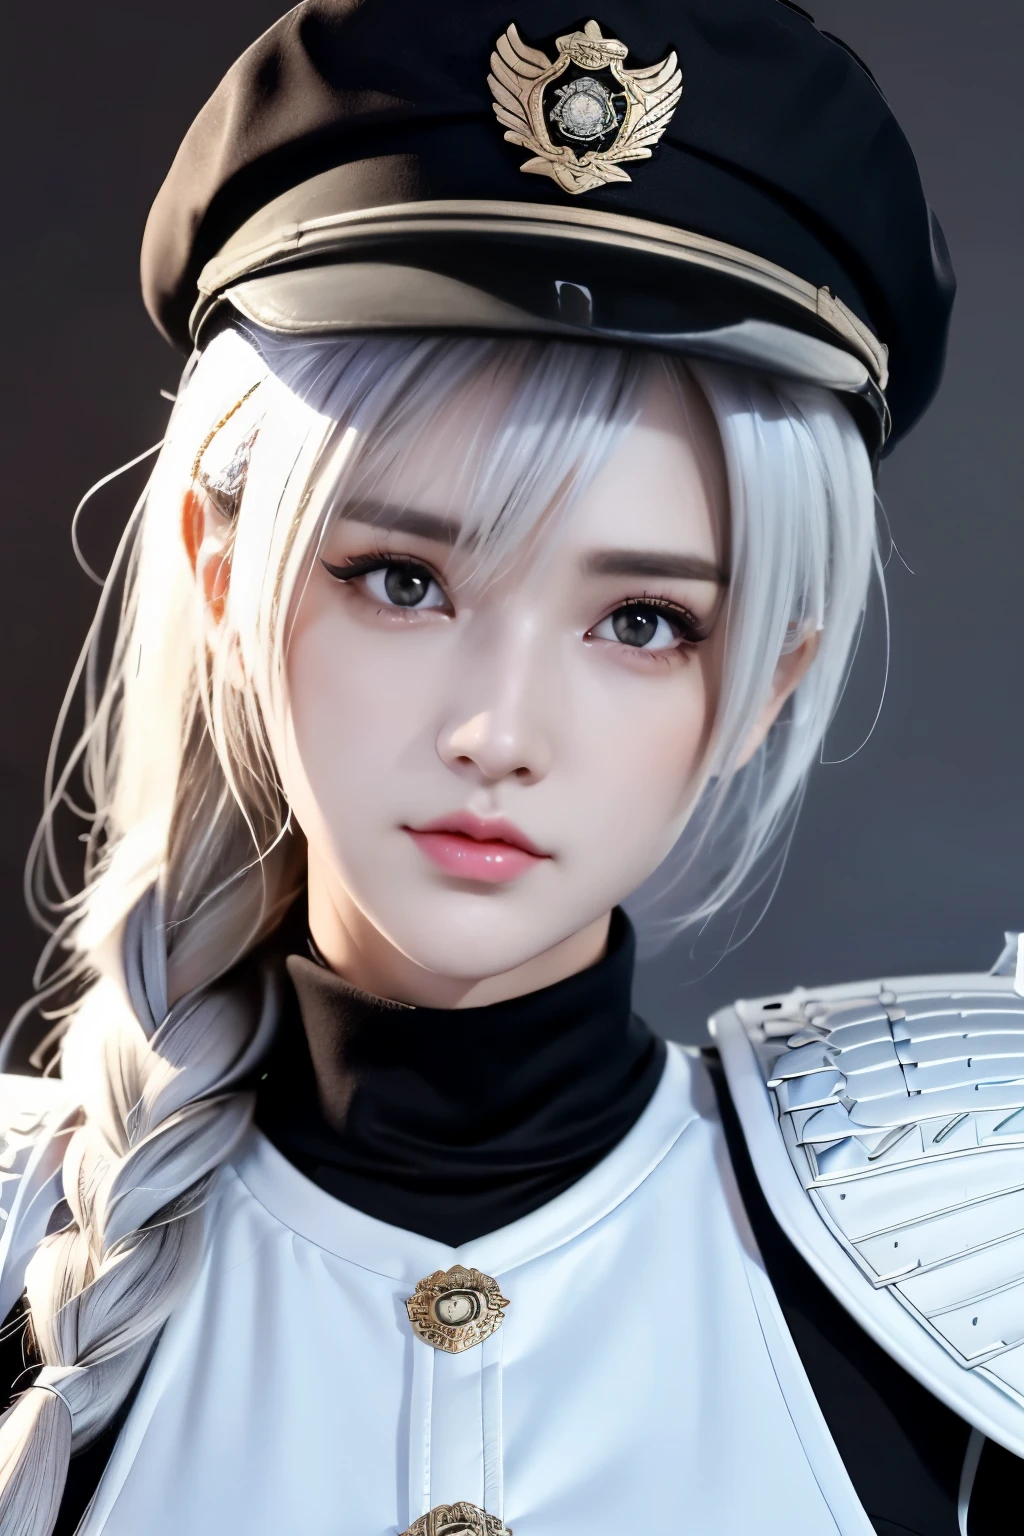 Masterpiece，The best qualities，Very high resolution，8K，((Portrait))，((Head close-up))，Original photo，real photo，Digital Photography， (A girl dressed in a combination of modern and technological style)，(Police officer)，22-year-old girl，(Random hairstyles，White hair)，(The pupils of the eyes are purple)，(Lachrymal mole in the corner of the eye)，charming，Elegant and noble，calm，Serious，(Big breastodern combat clothing，Joint Armor，Police uniform，Badge，White dress，Armor，Metallic luster，Officer's cap)，Pattern detail，( Special Forceemale soldier photo pose，Street background，Movie lights，Ray tracing，Game CG，((3D Unreal Engine))，oc rendering reflection texture